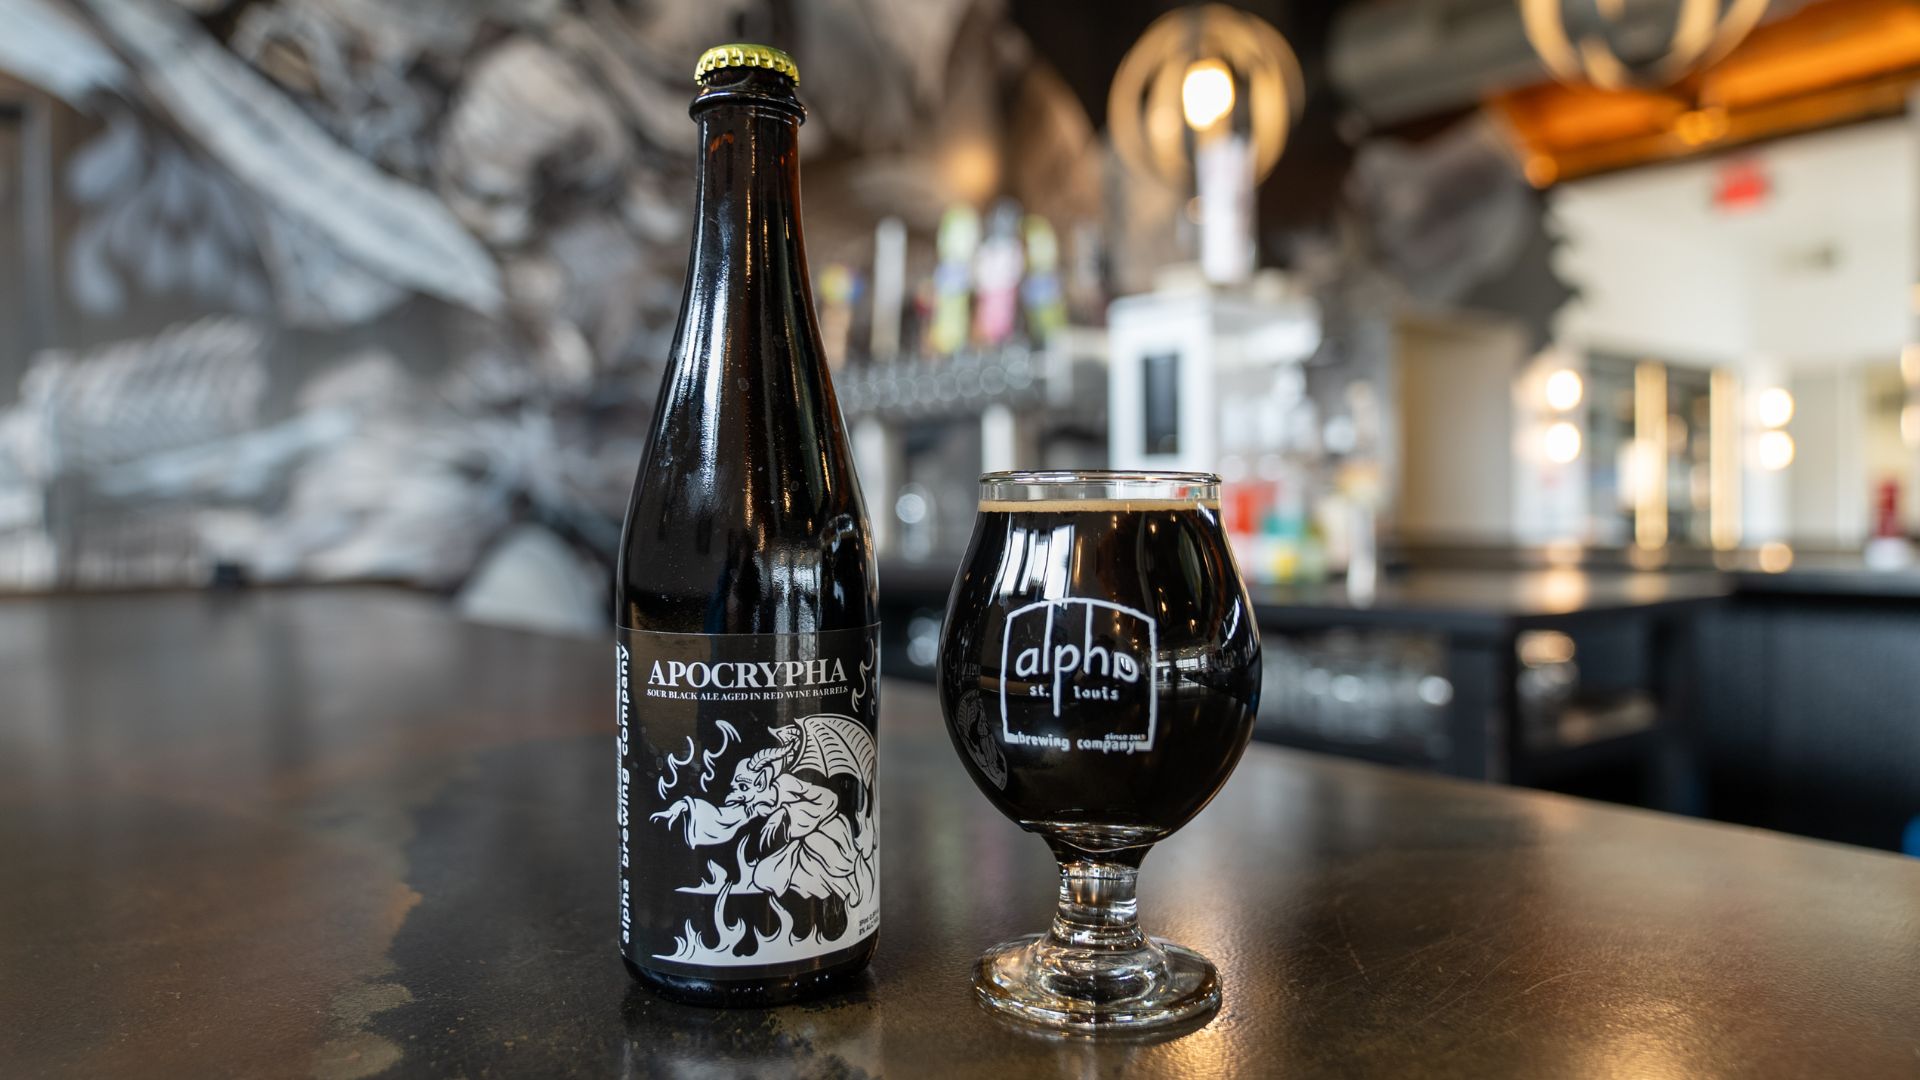 Alpha Brewing Company is known for its barrel-aged, fruited sours.